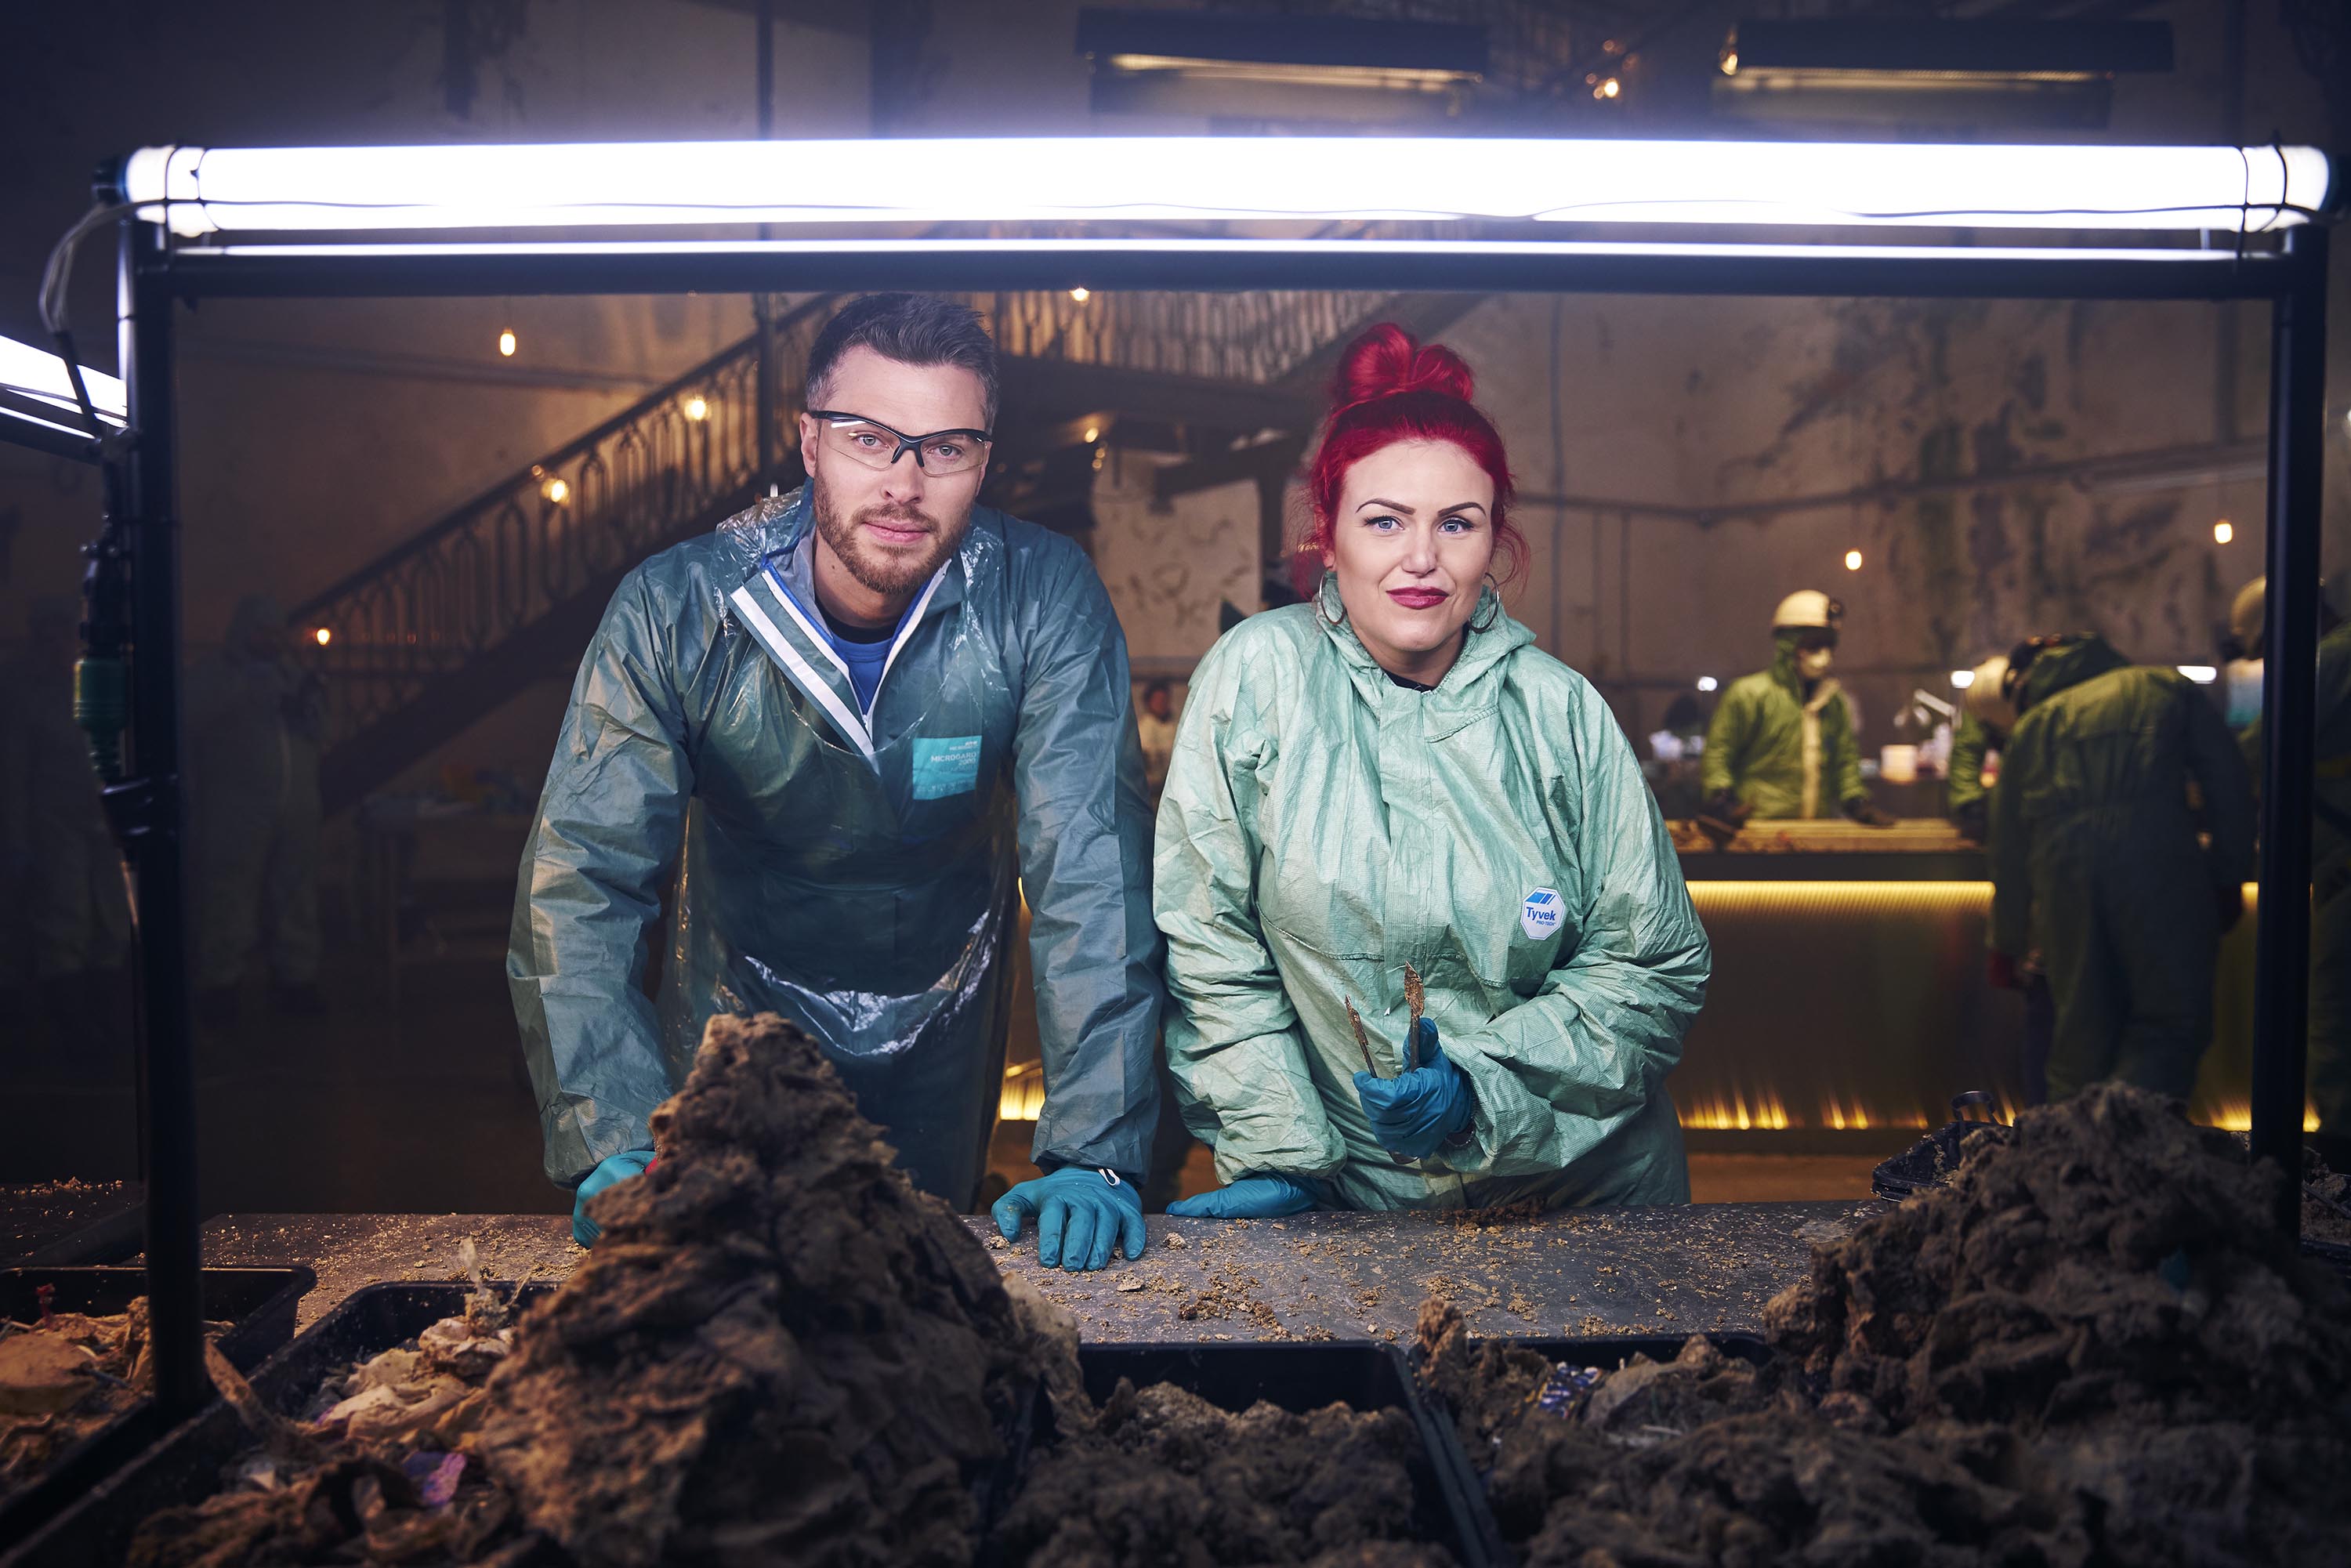 Blackfriars Road ‘fatberg’ to be dissected on Channel 4